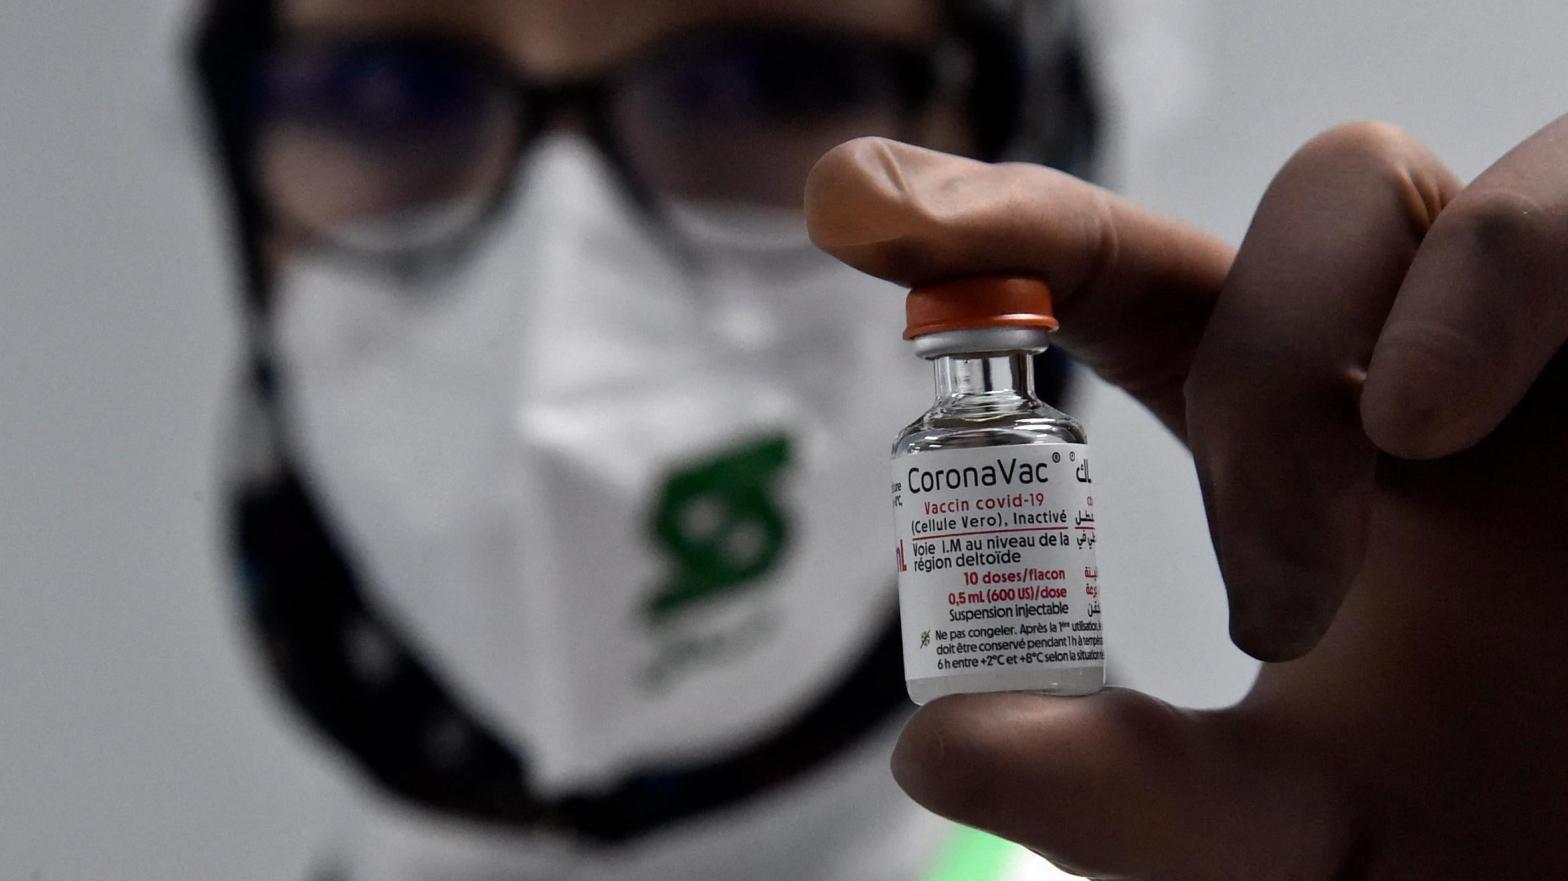 A lab technician from pharma company Saidal showing a vial of the Sinovac vaccine for the novel coronavirus in Constantine, Algeria, in September 2021. (Photo: Ryad Kramdi / AFP, Getty Images)